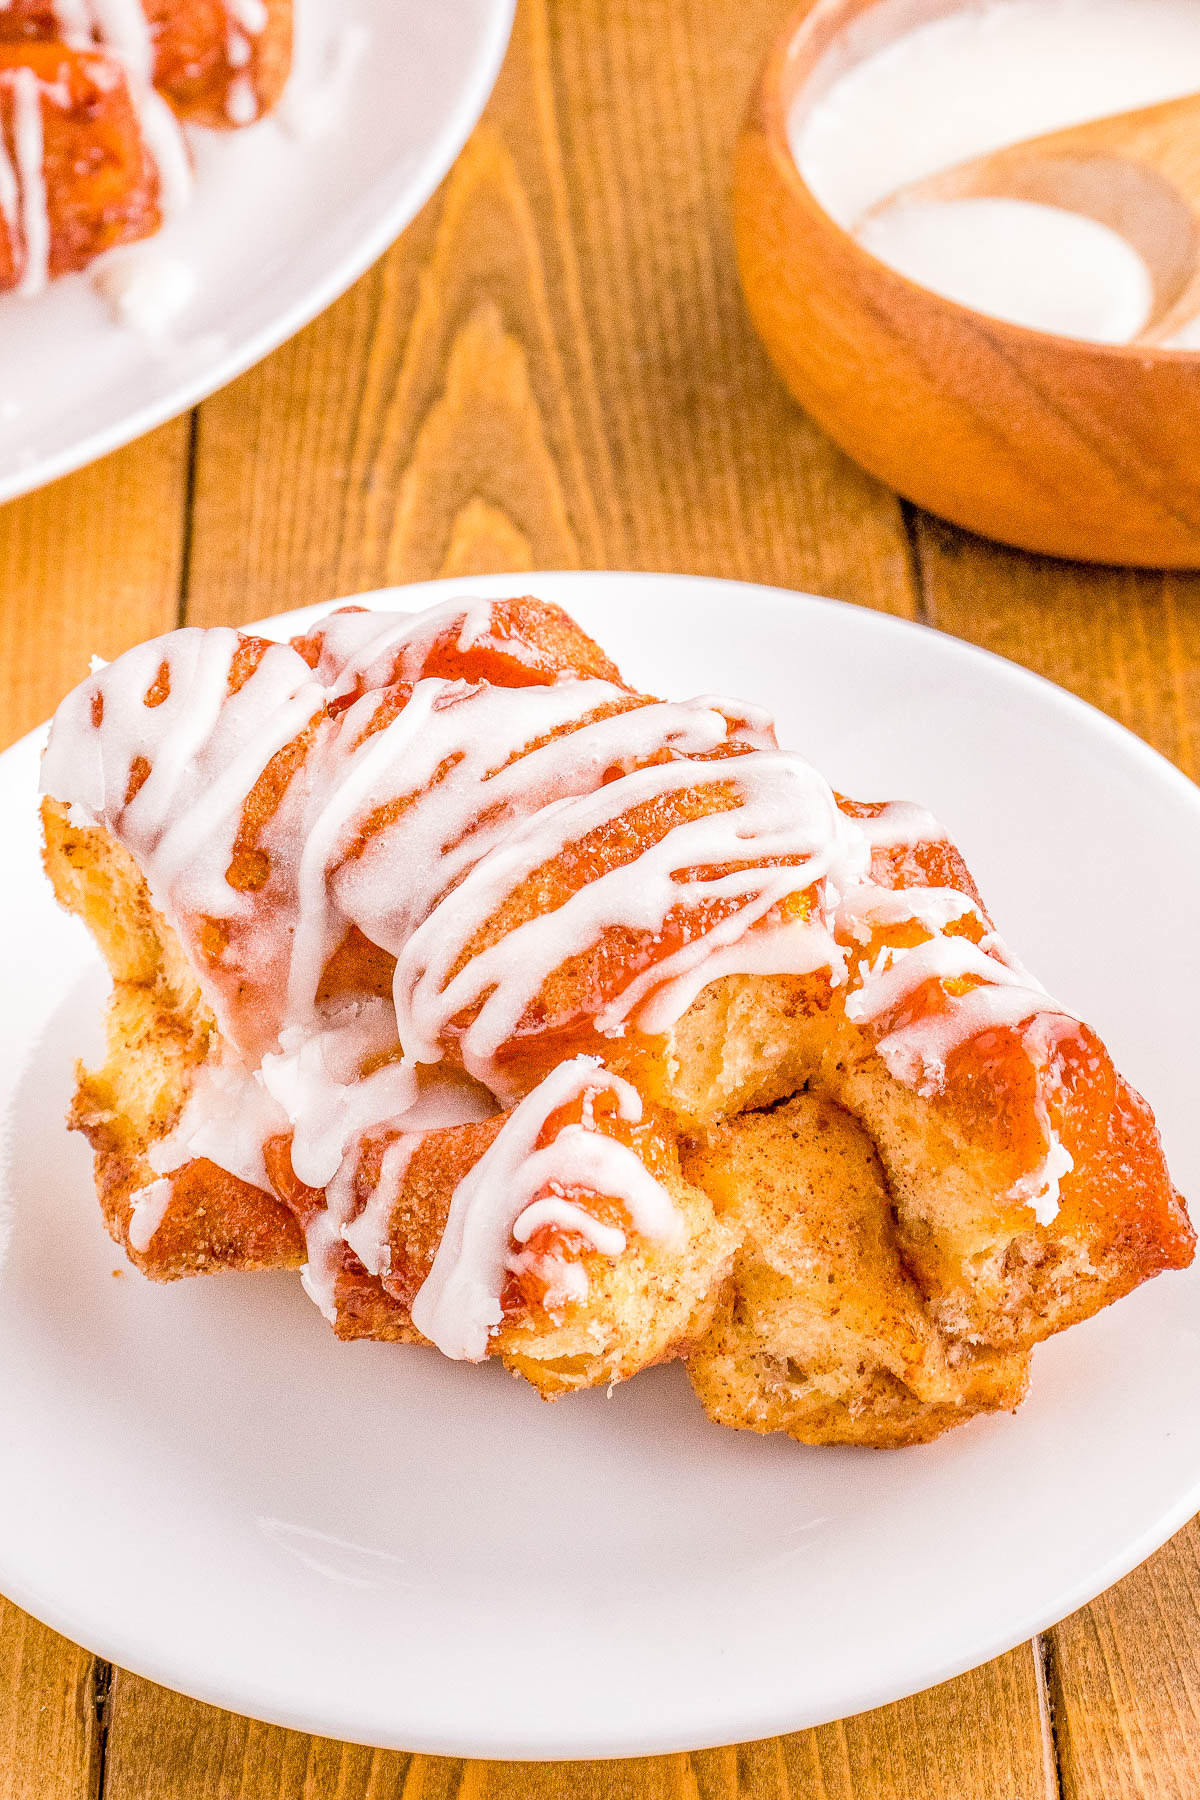 A plate containing a freshly baked cinnamon roll drizzled with white icing, on a wooden table with a bowl of extra icing in the background.